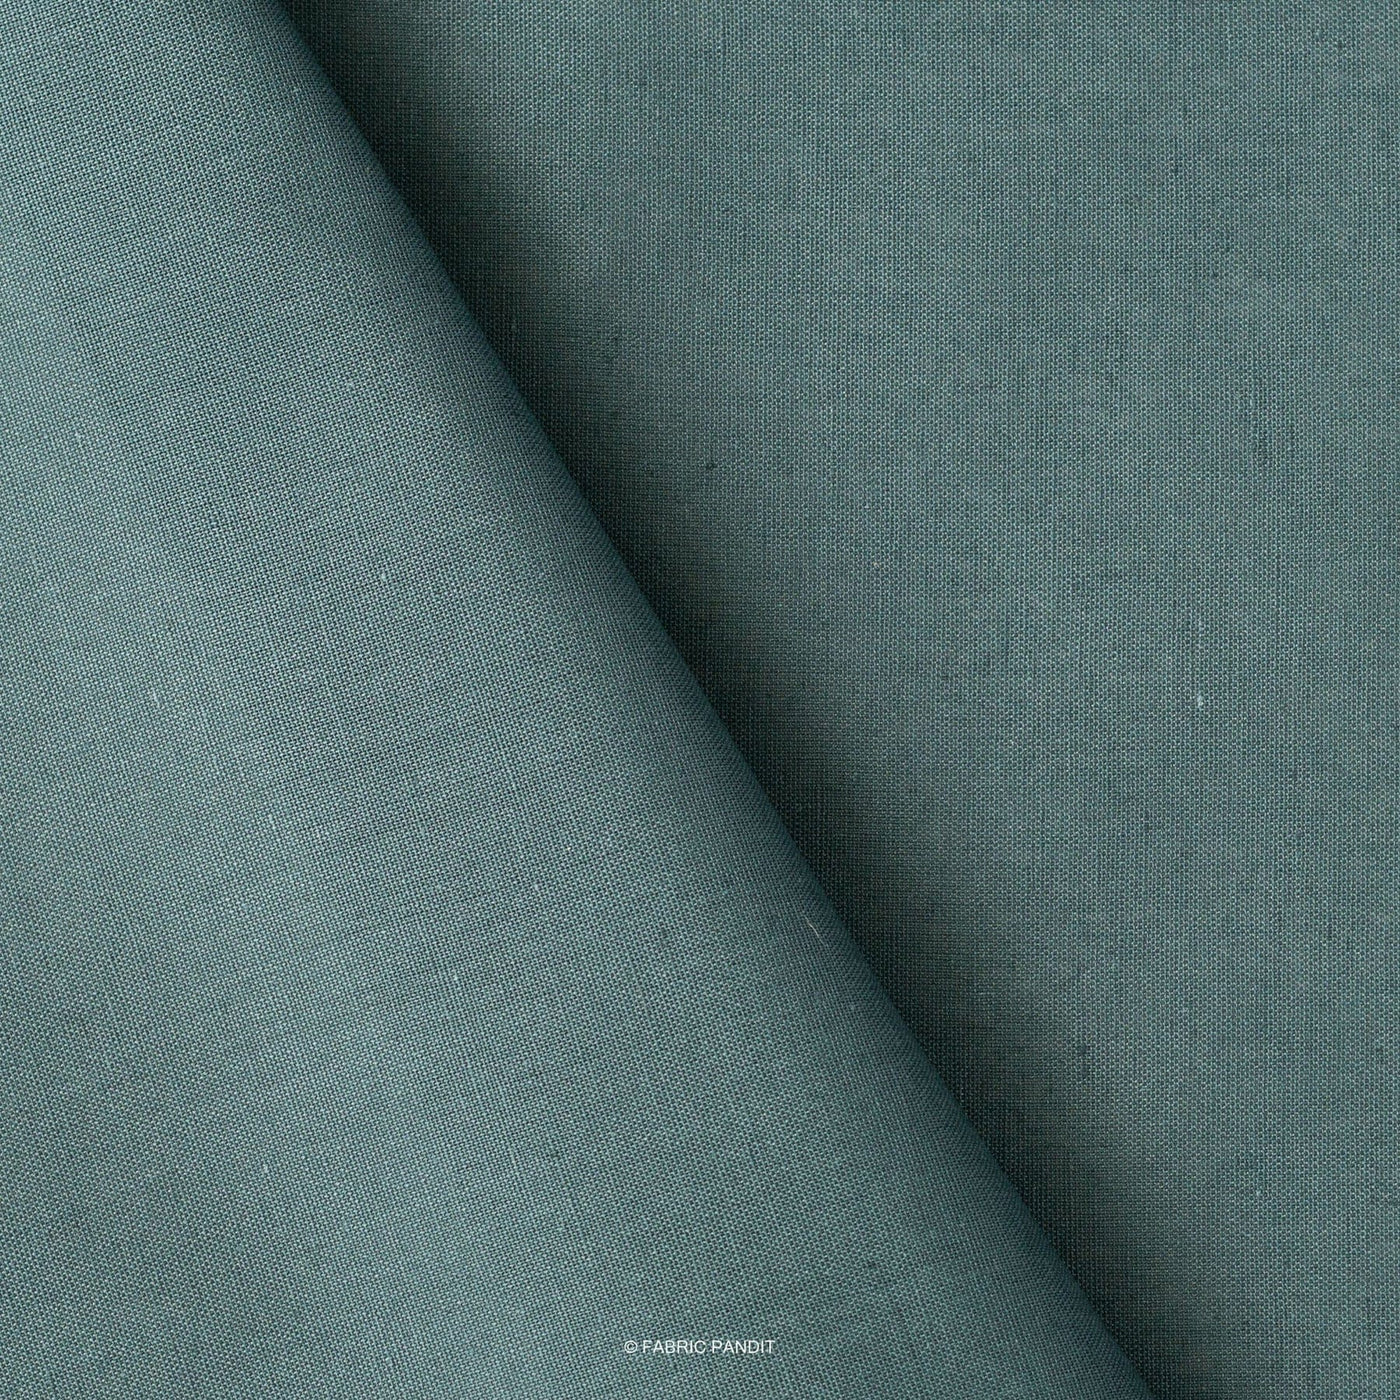 Fabric Pandit Fabric Teal Color Pure Cotton Linen Fabric (Width 42 Inches)